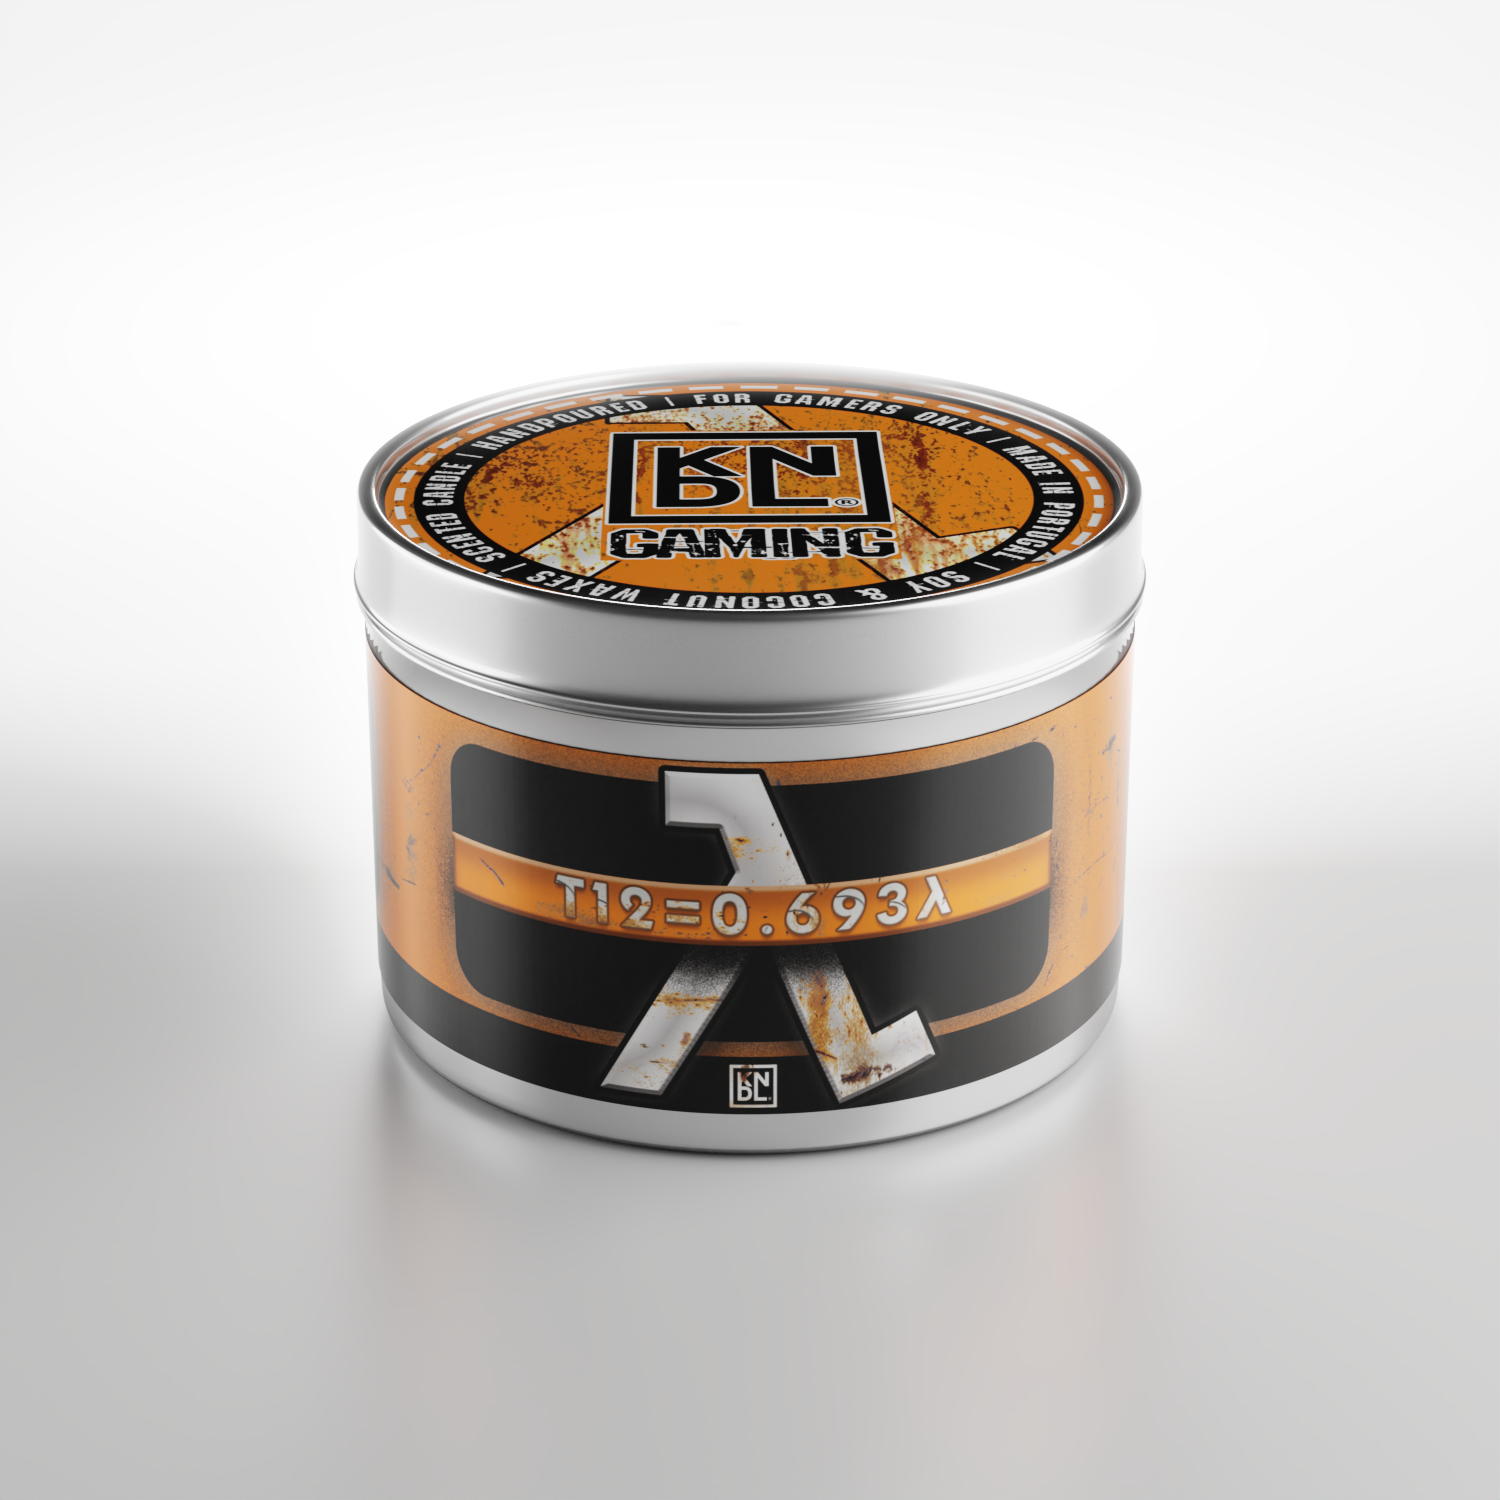 TIN NR 21 | T12=0.693Λ | HALF-LIFE INSPIRED SCENTED CANDLE